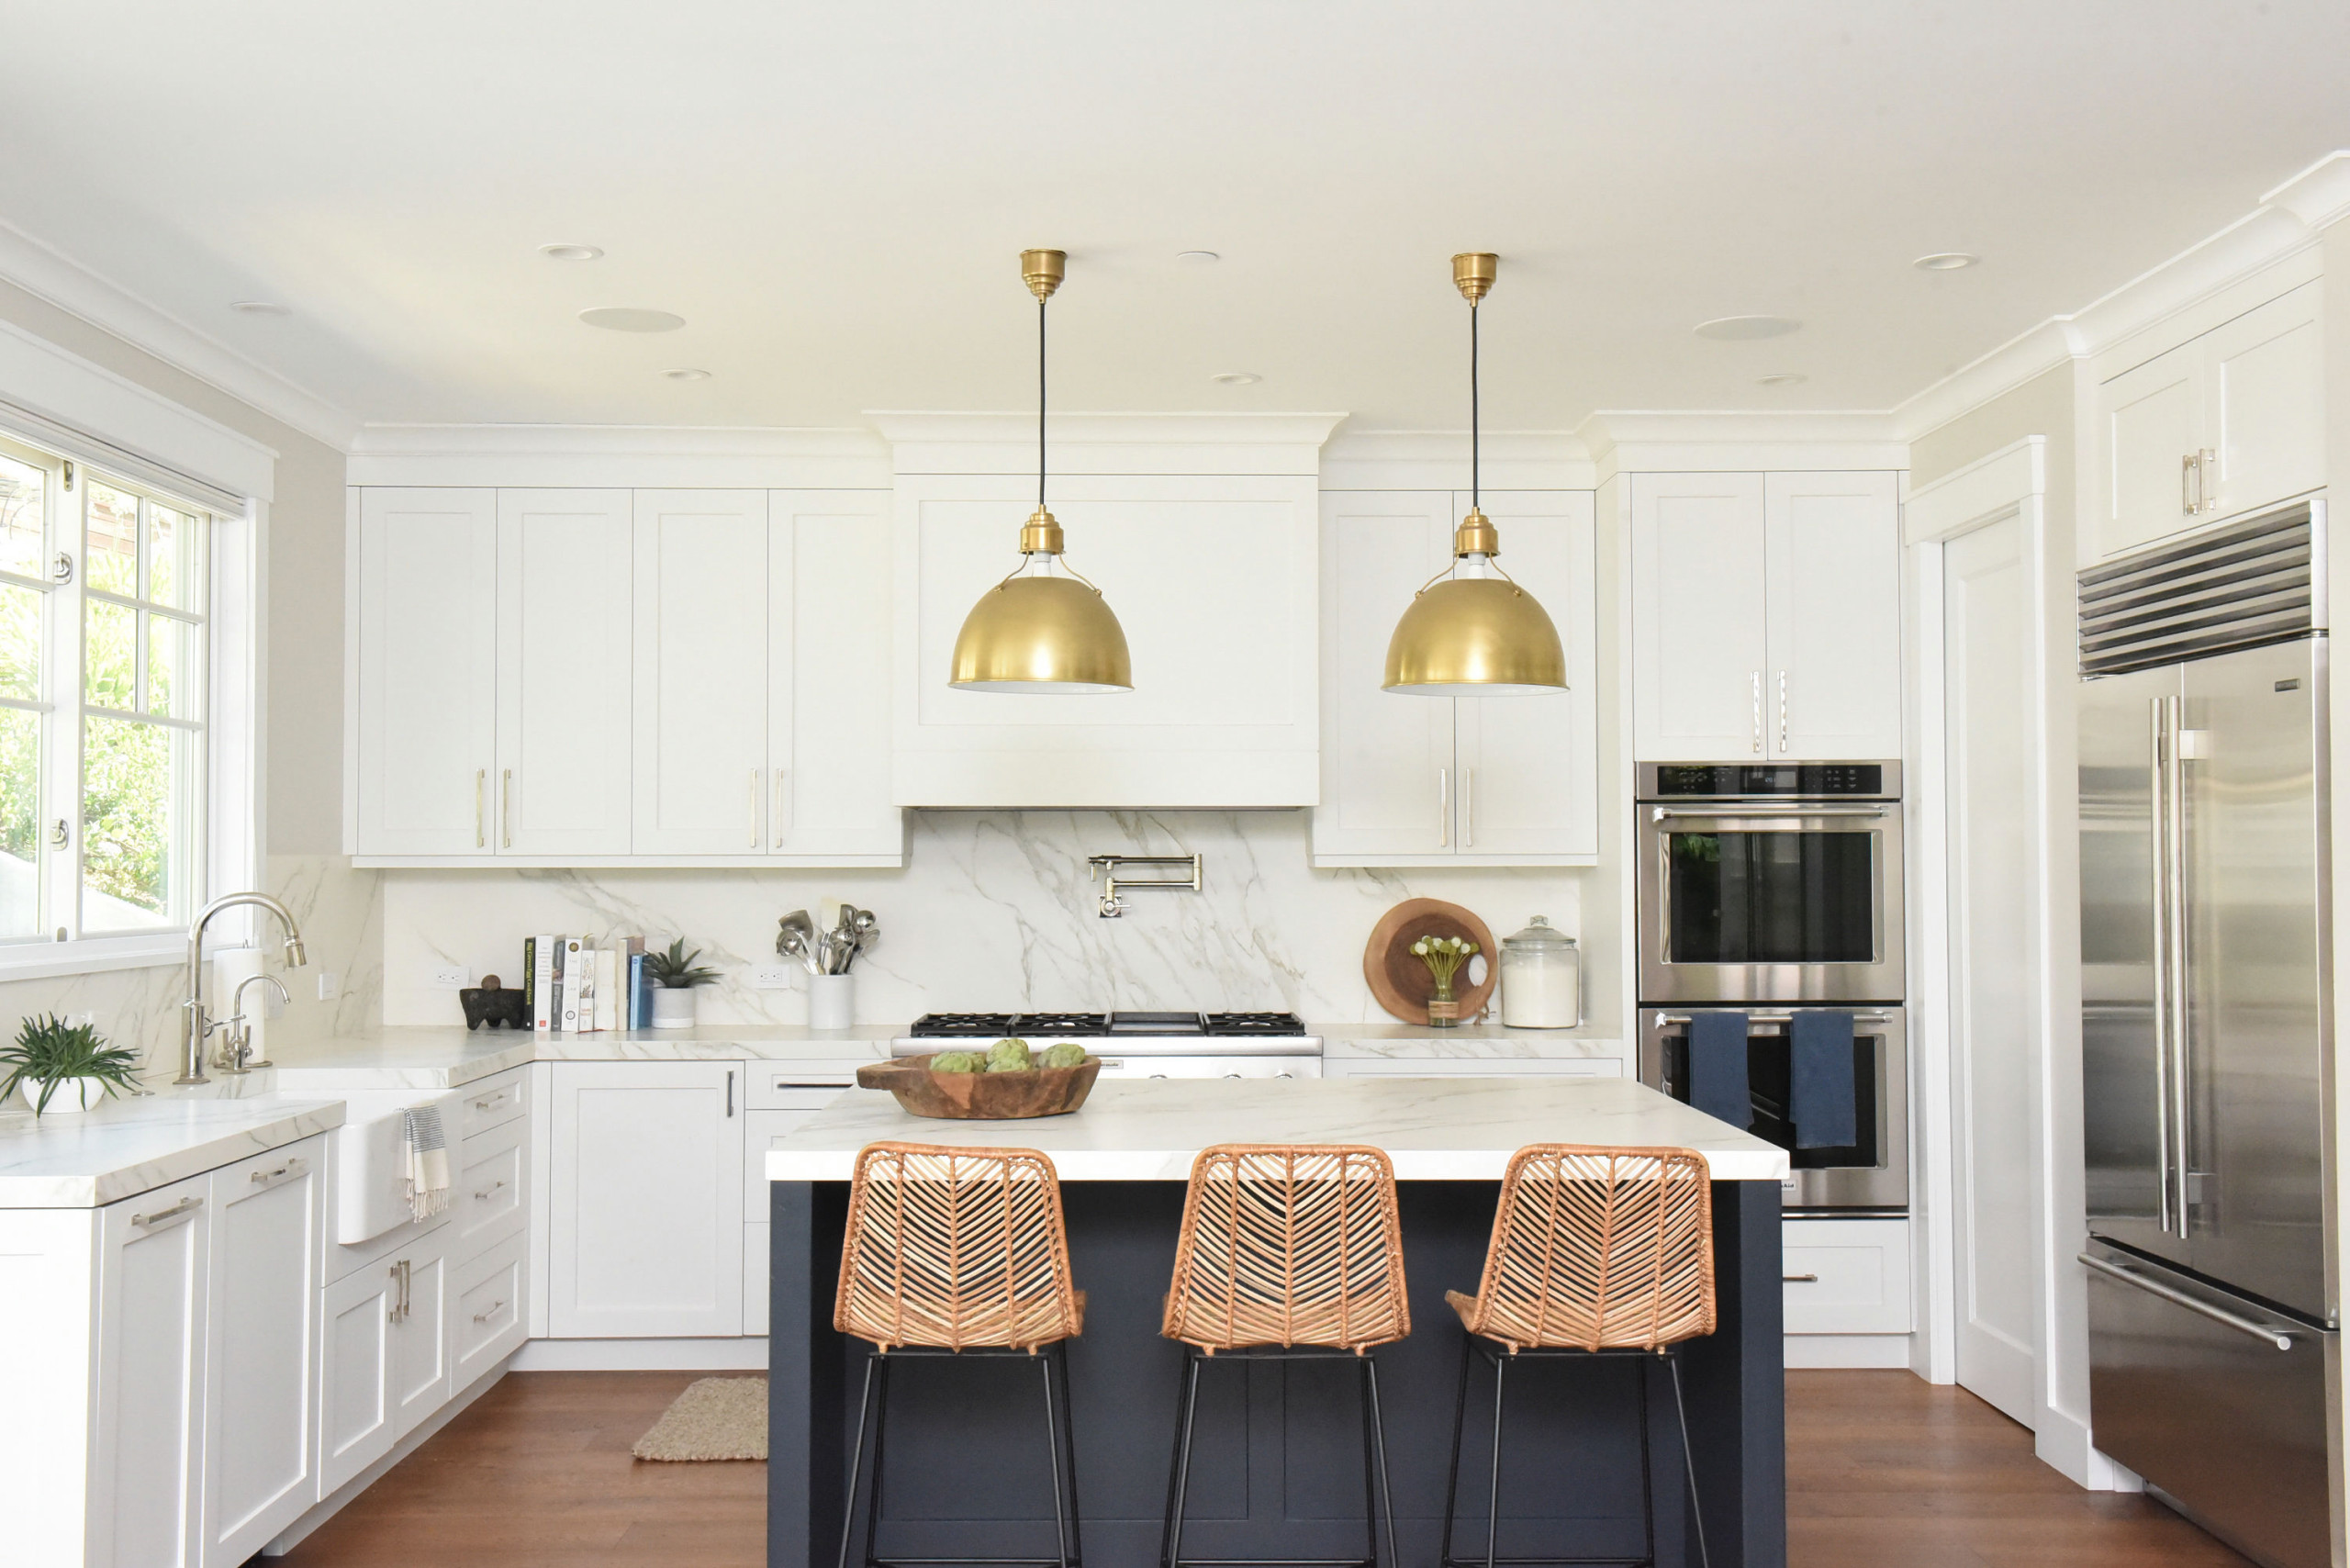 How To Plan Your Kitchen Island Seating